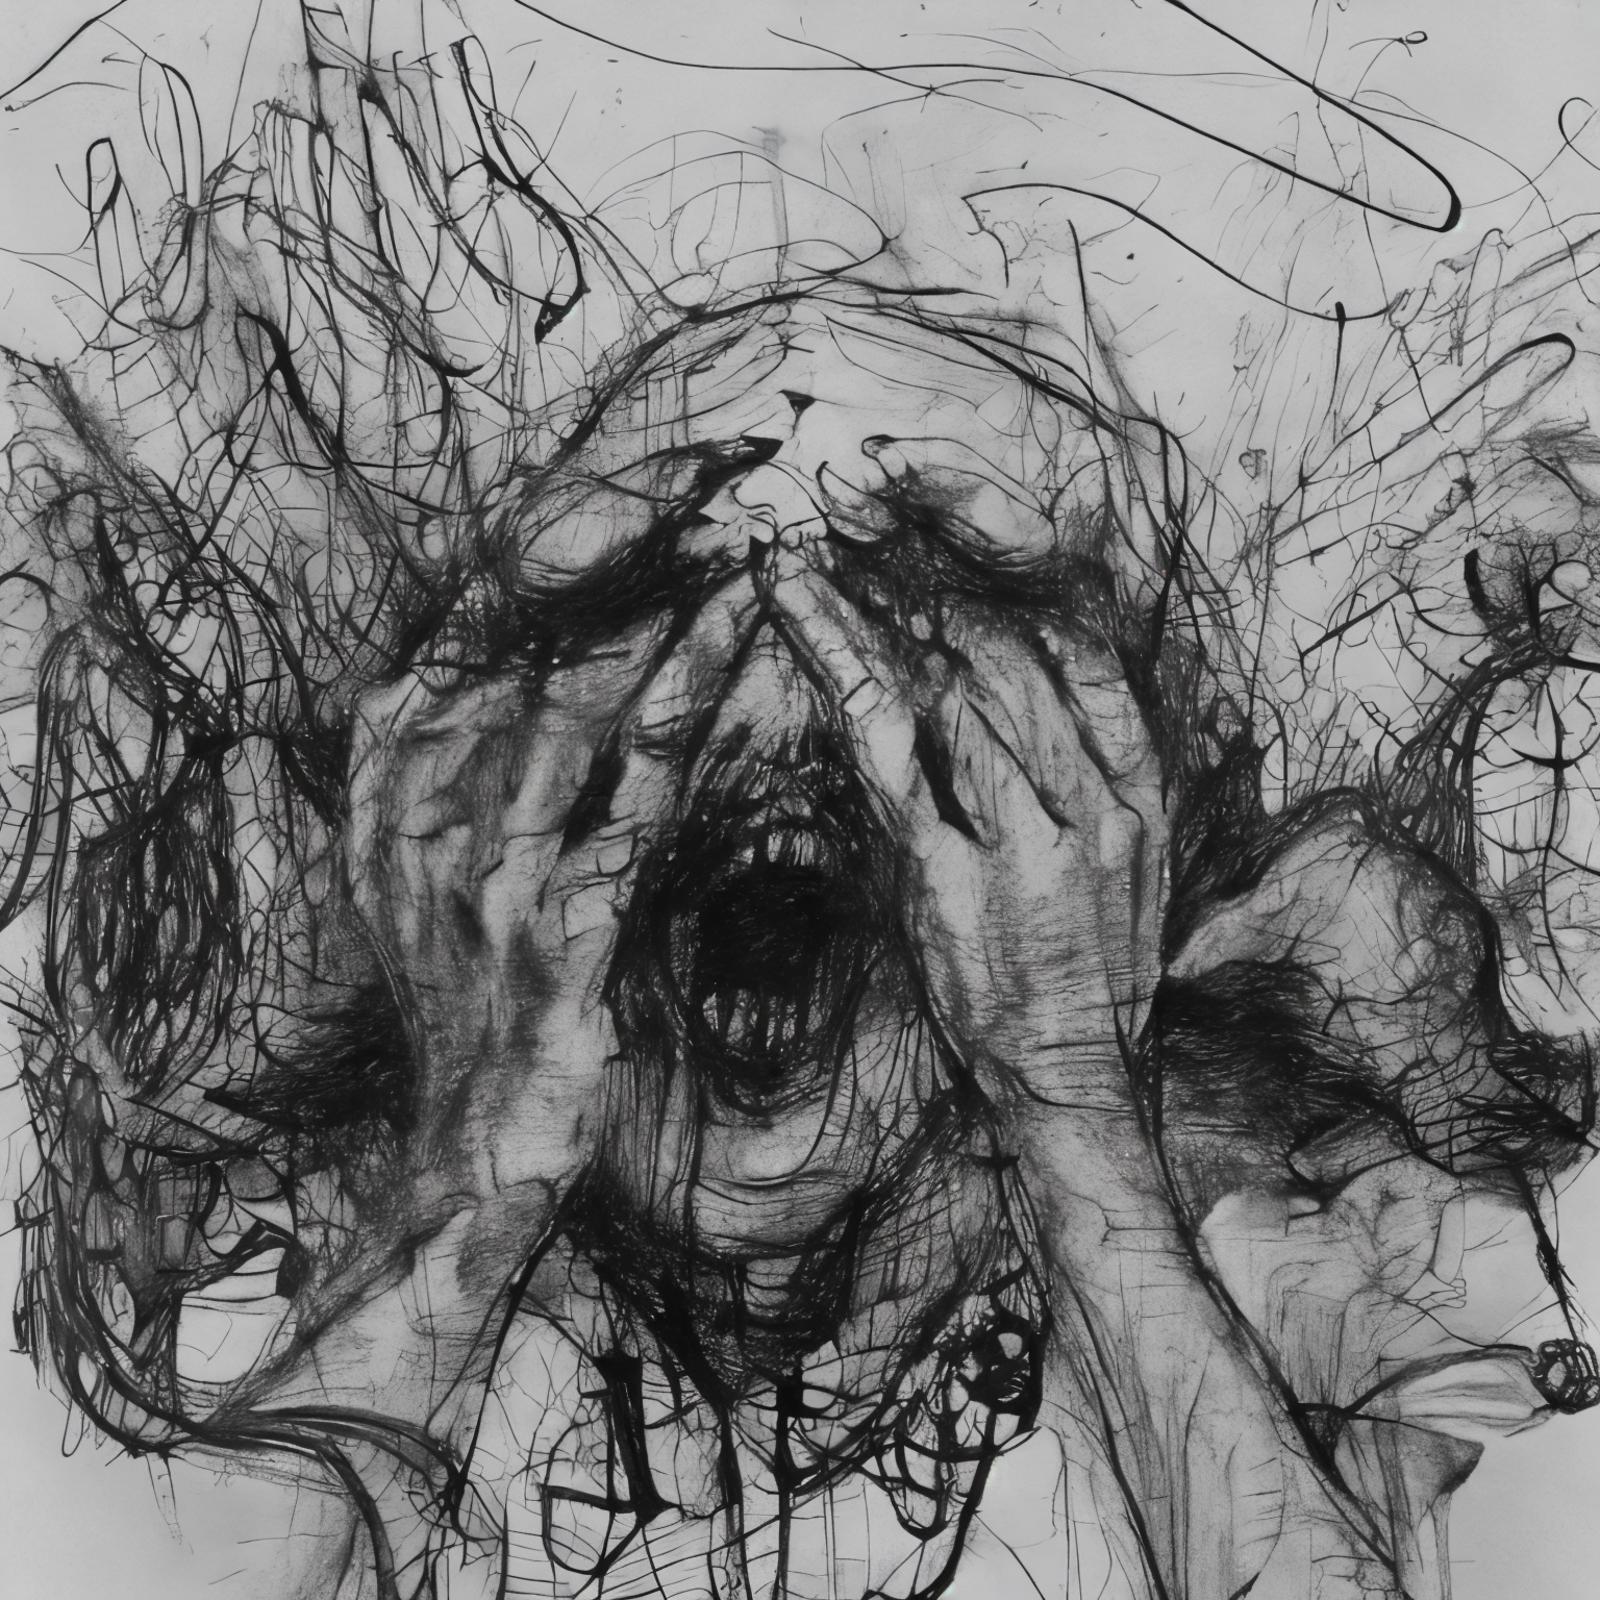 A drawing of a man with his mouth open and his hands on his face.